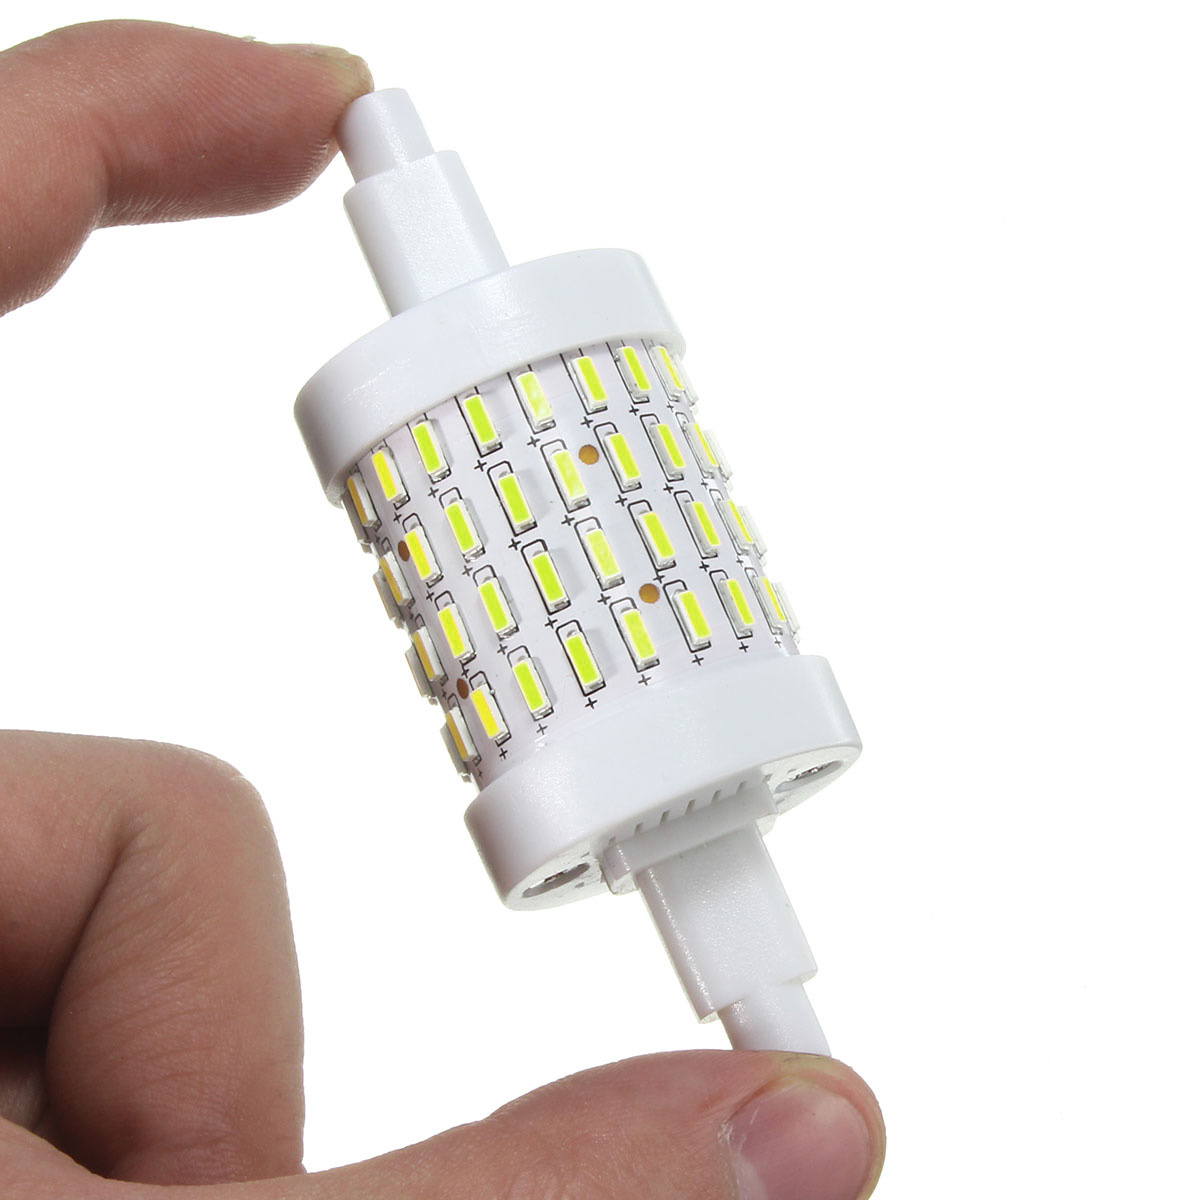 

Dimmable R7S LED Bulb 78mm 5W 72 SMD 4014 350Lm LED Pure White Warm White Corn Light Bulb AC85-265V